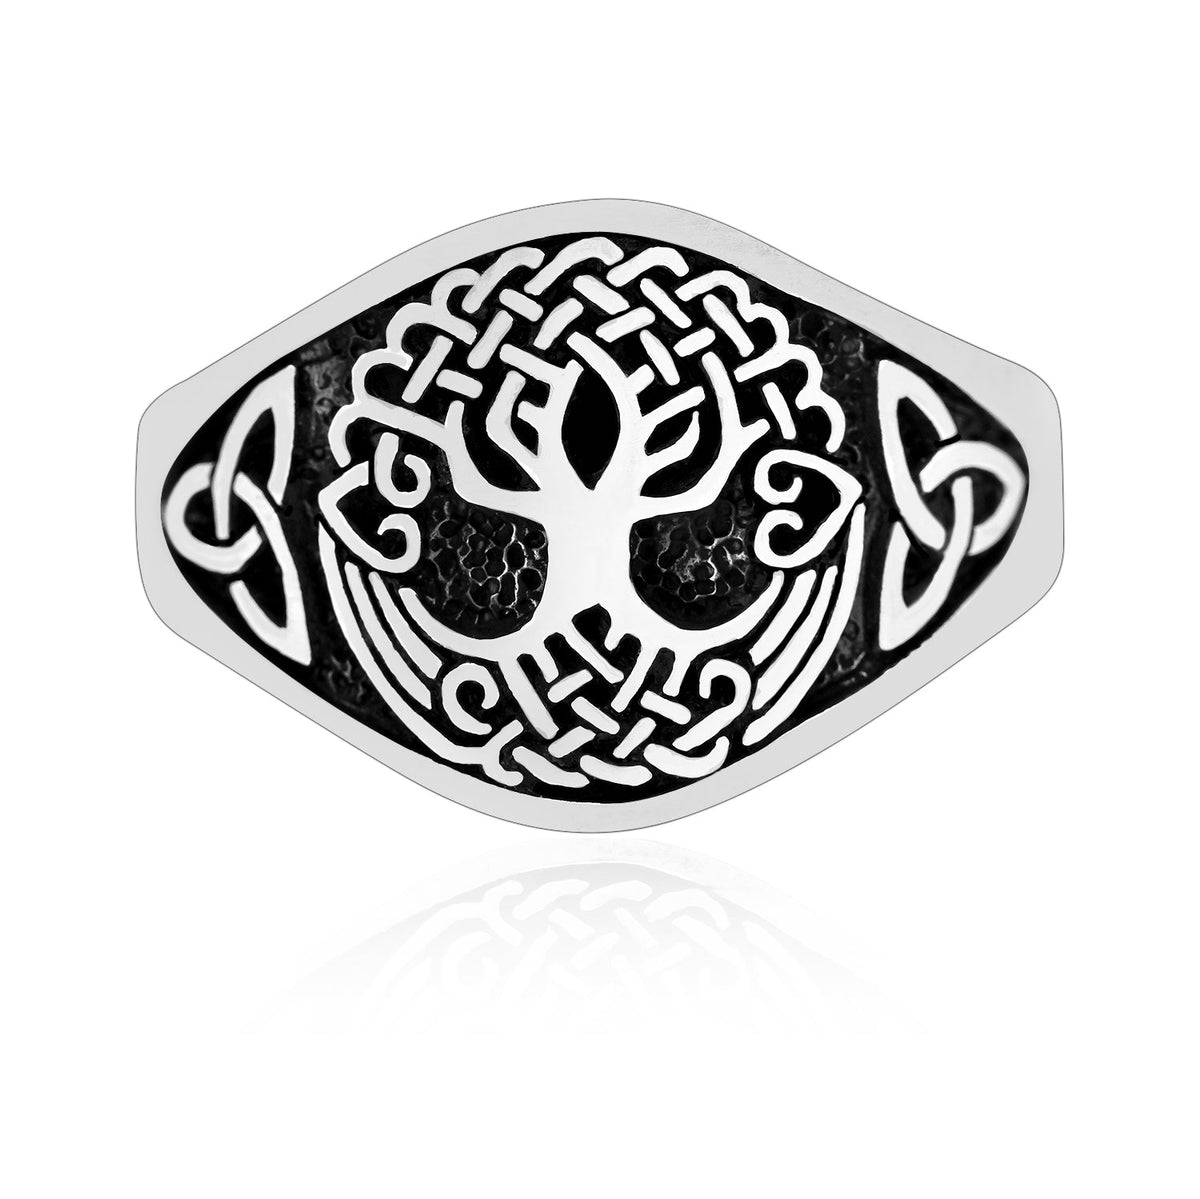 925 Sterling Silver Yggdrasil with Triquetra Pagan Ring - SilverMania925